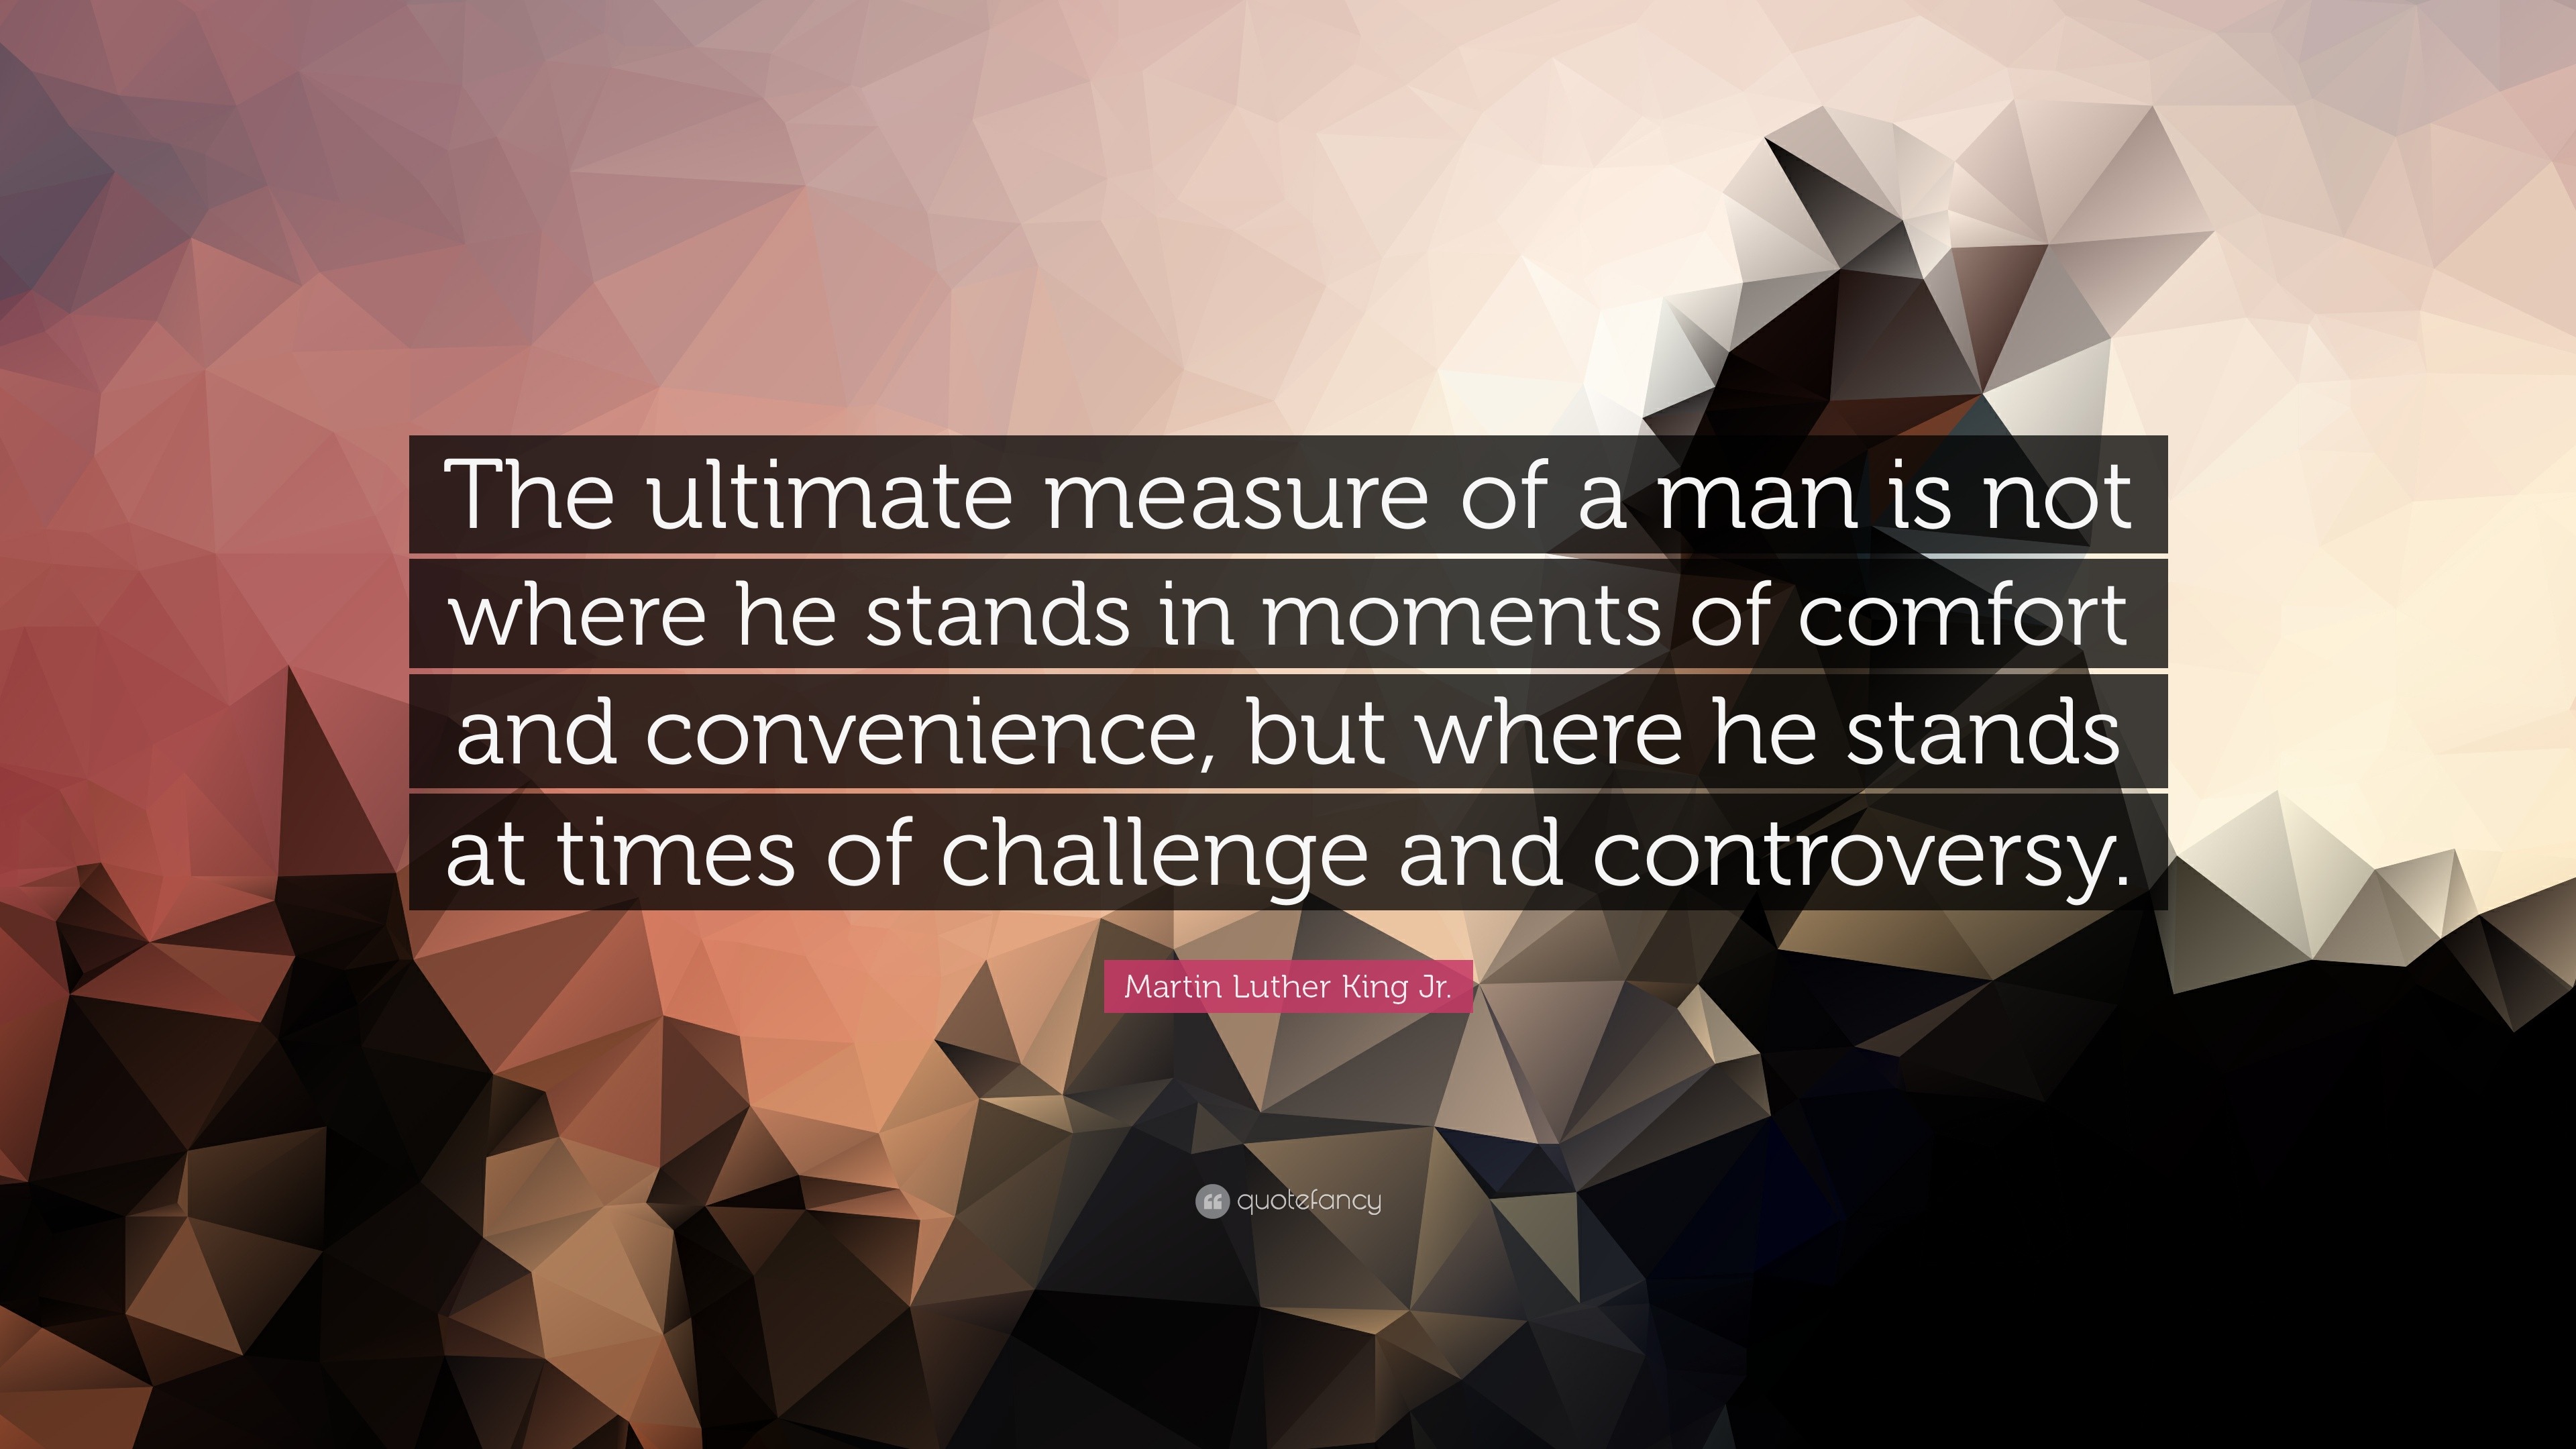 the ultimate measure of a man speech meaning